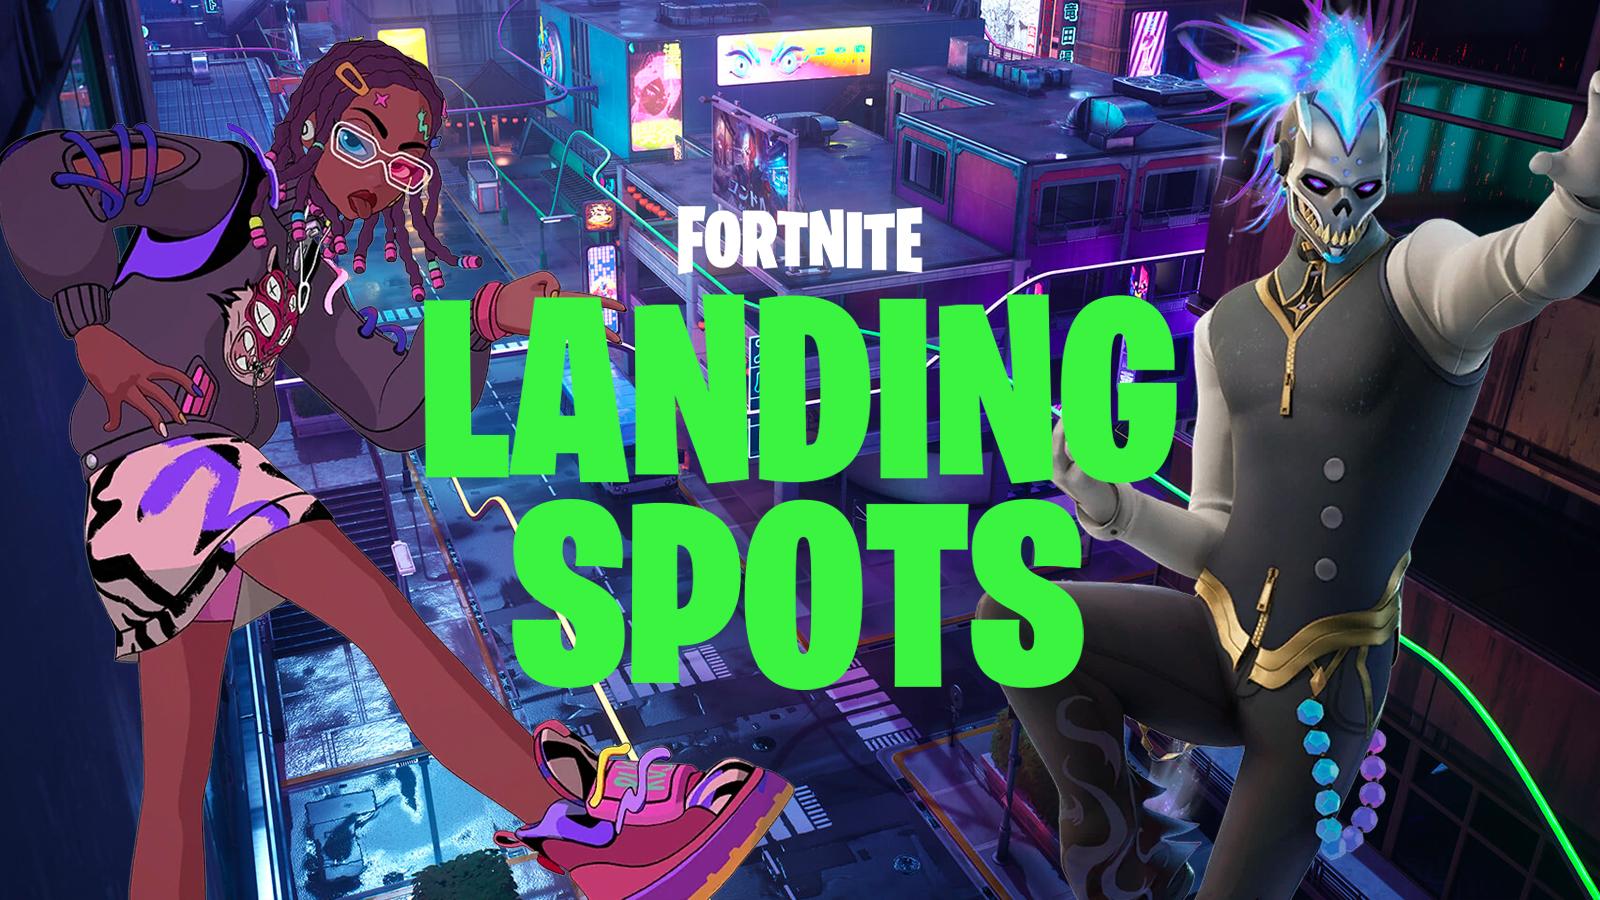 An image of the Fortnite map with text saying 'Best Landing Spots'